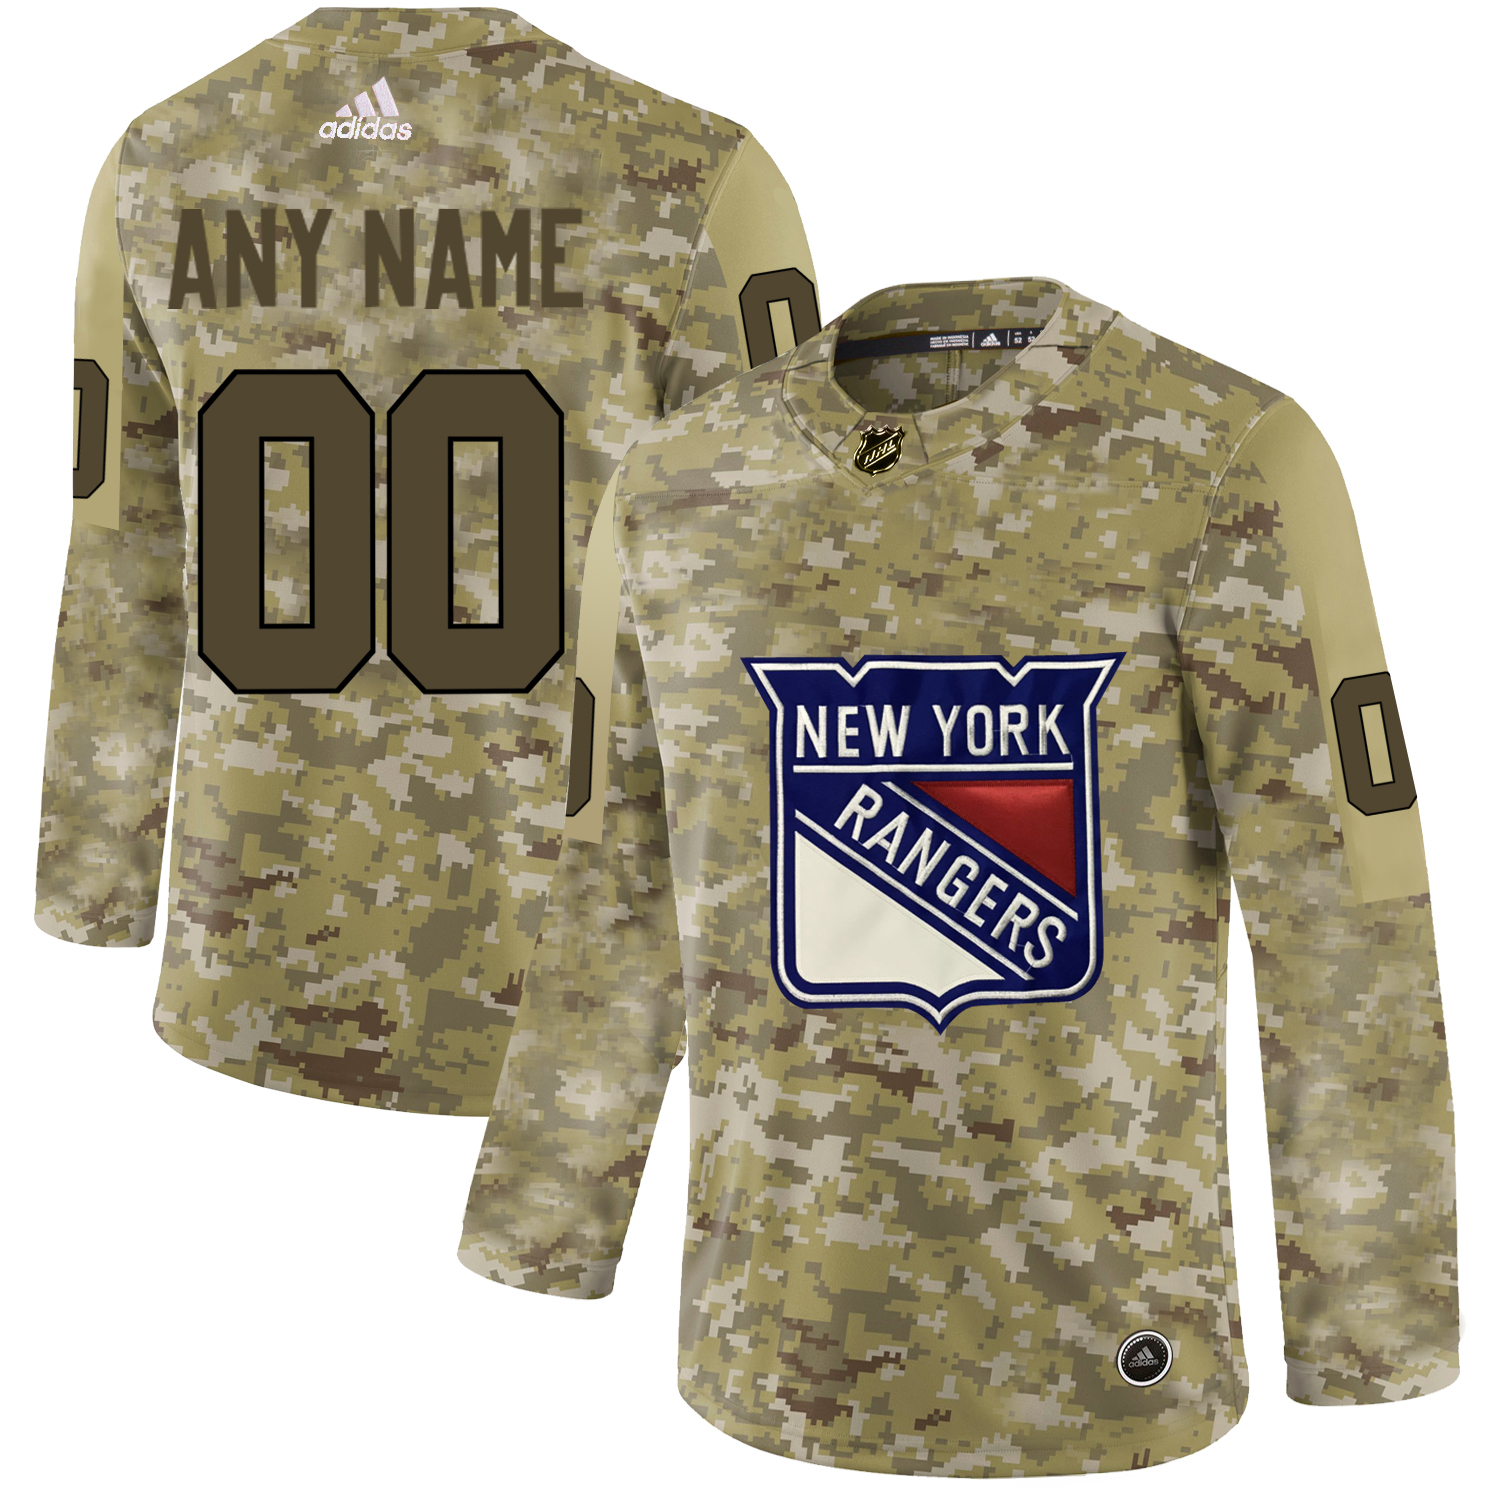 Men's Adidas Rangers Personalized Camo Authentic NHL Jersey